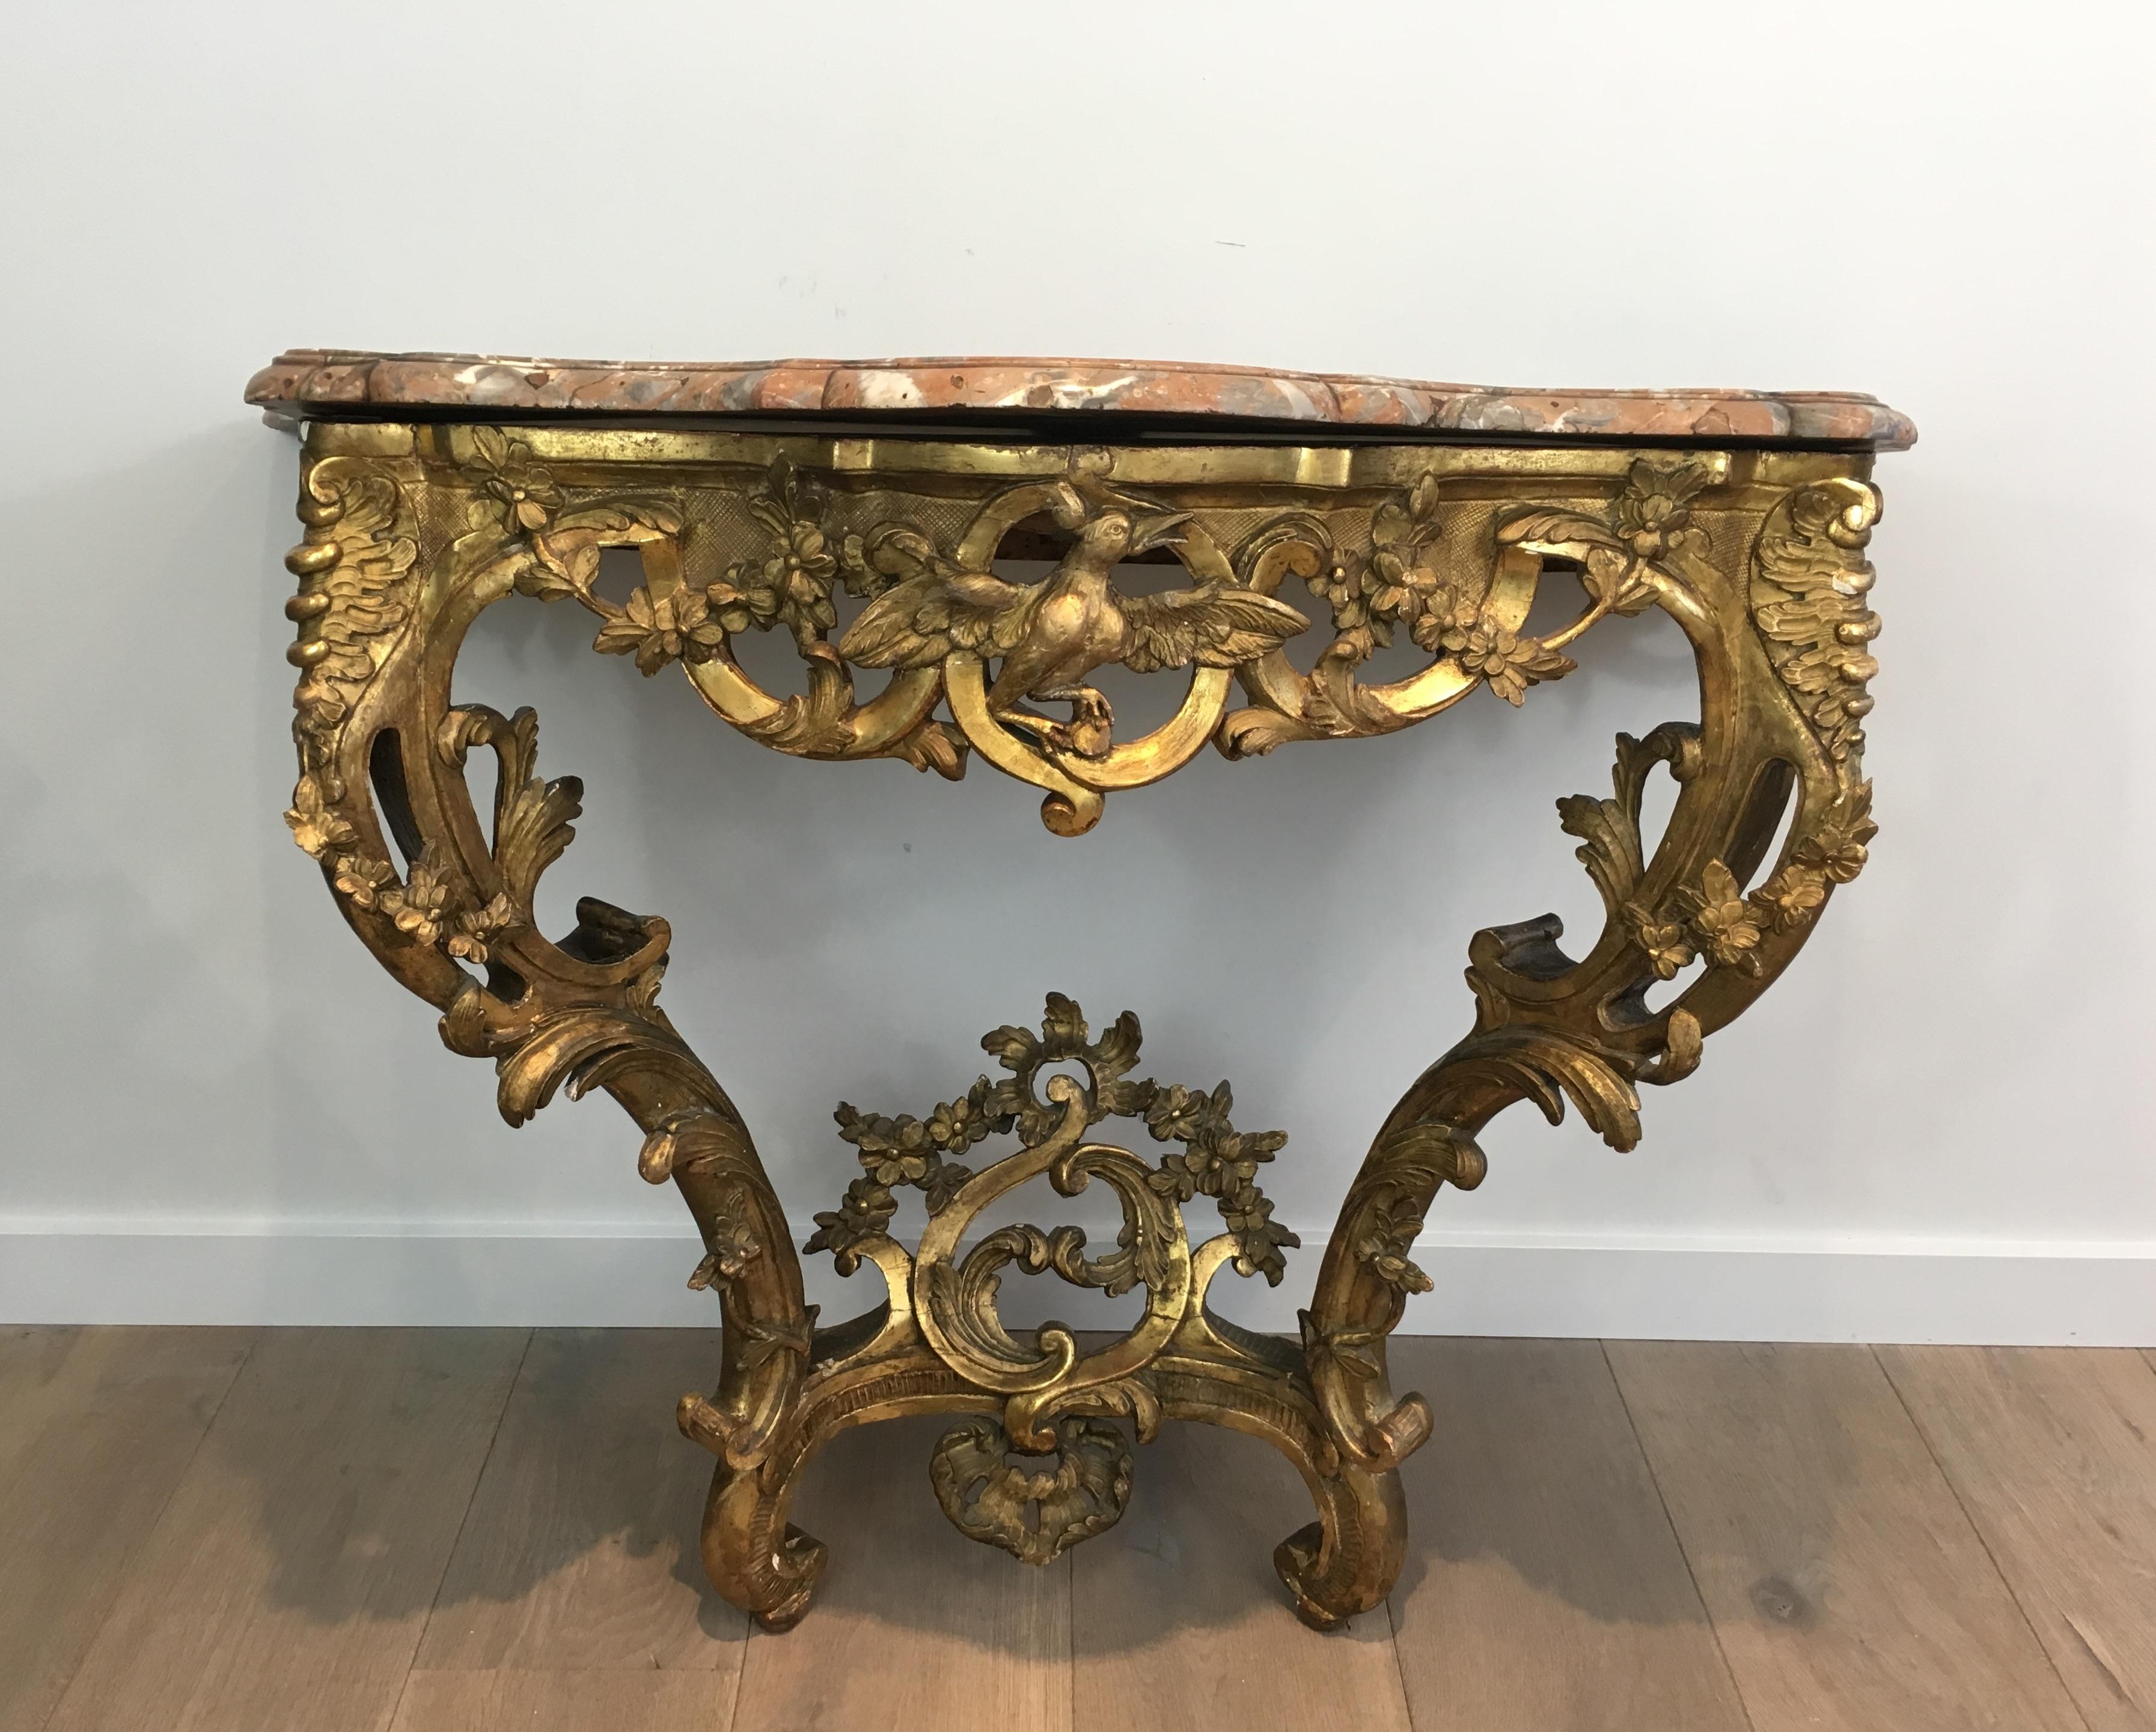 Carved French 18th Century Giltwood Console Table with Red Marble Top, Louis XV Period For Sale